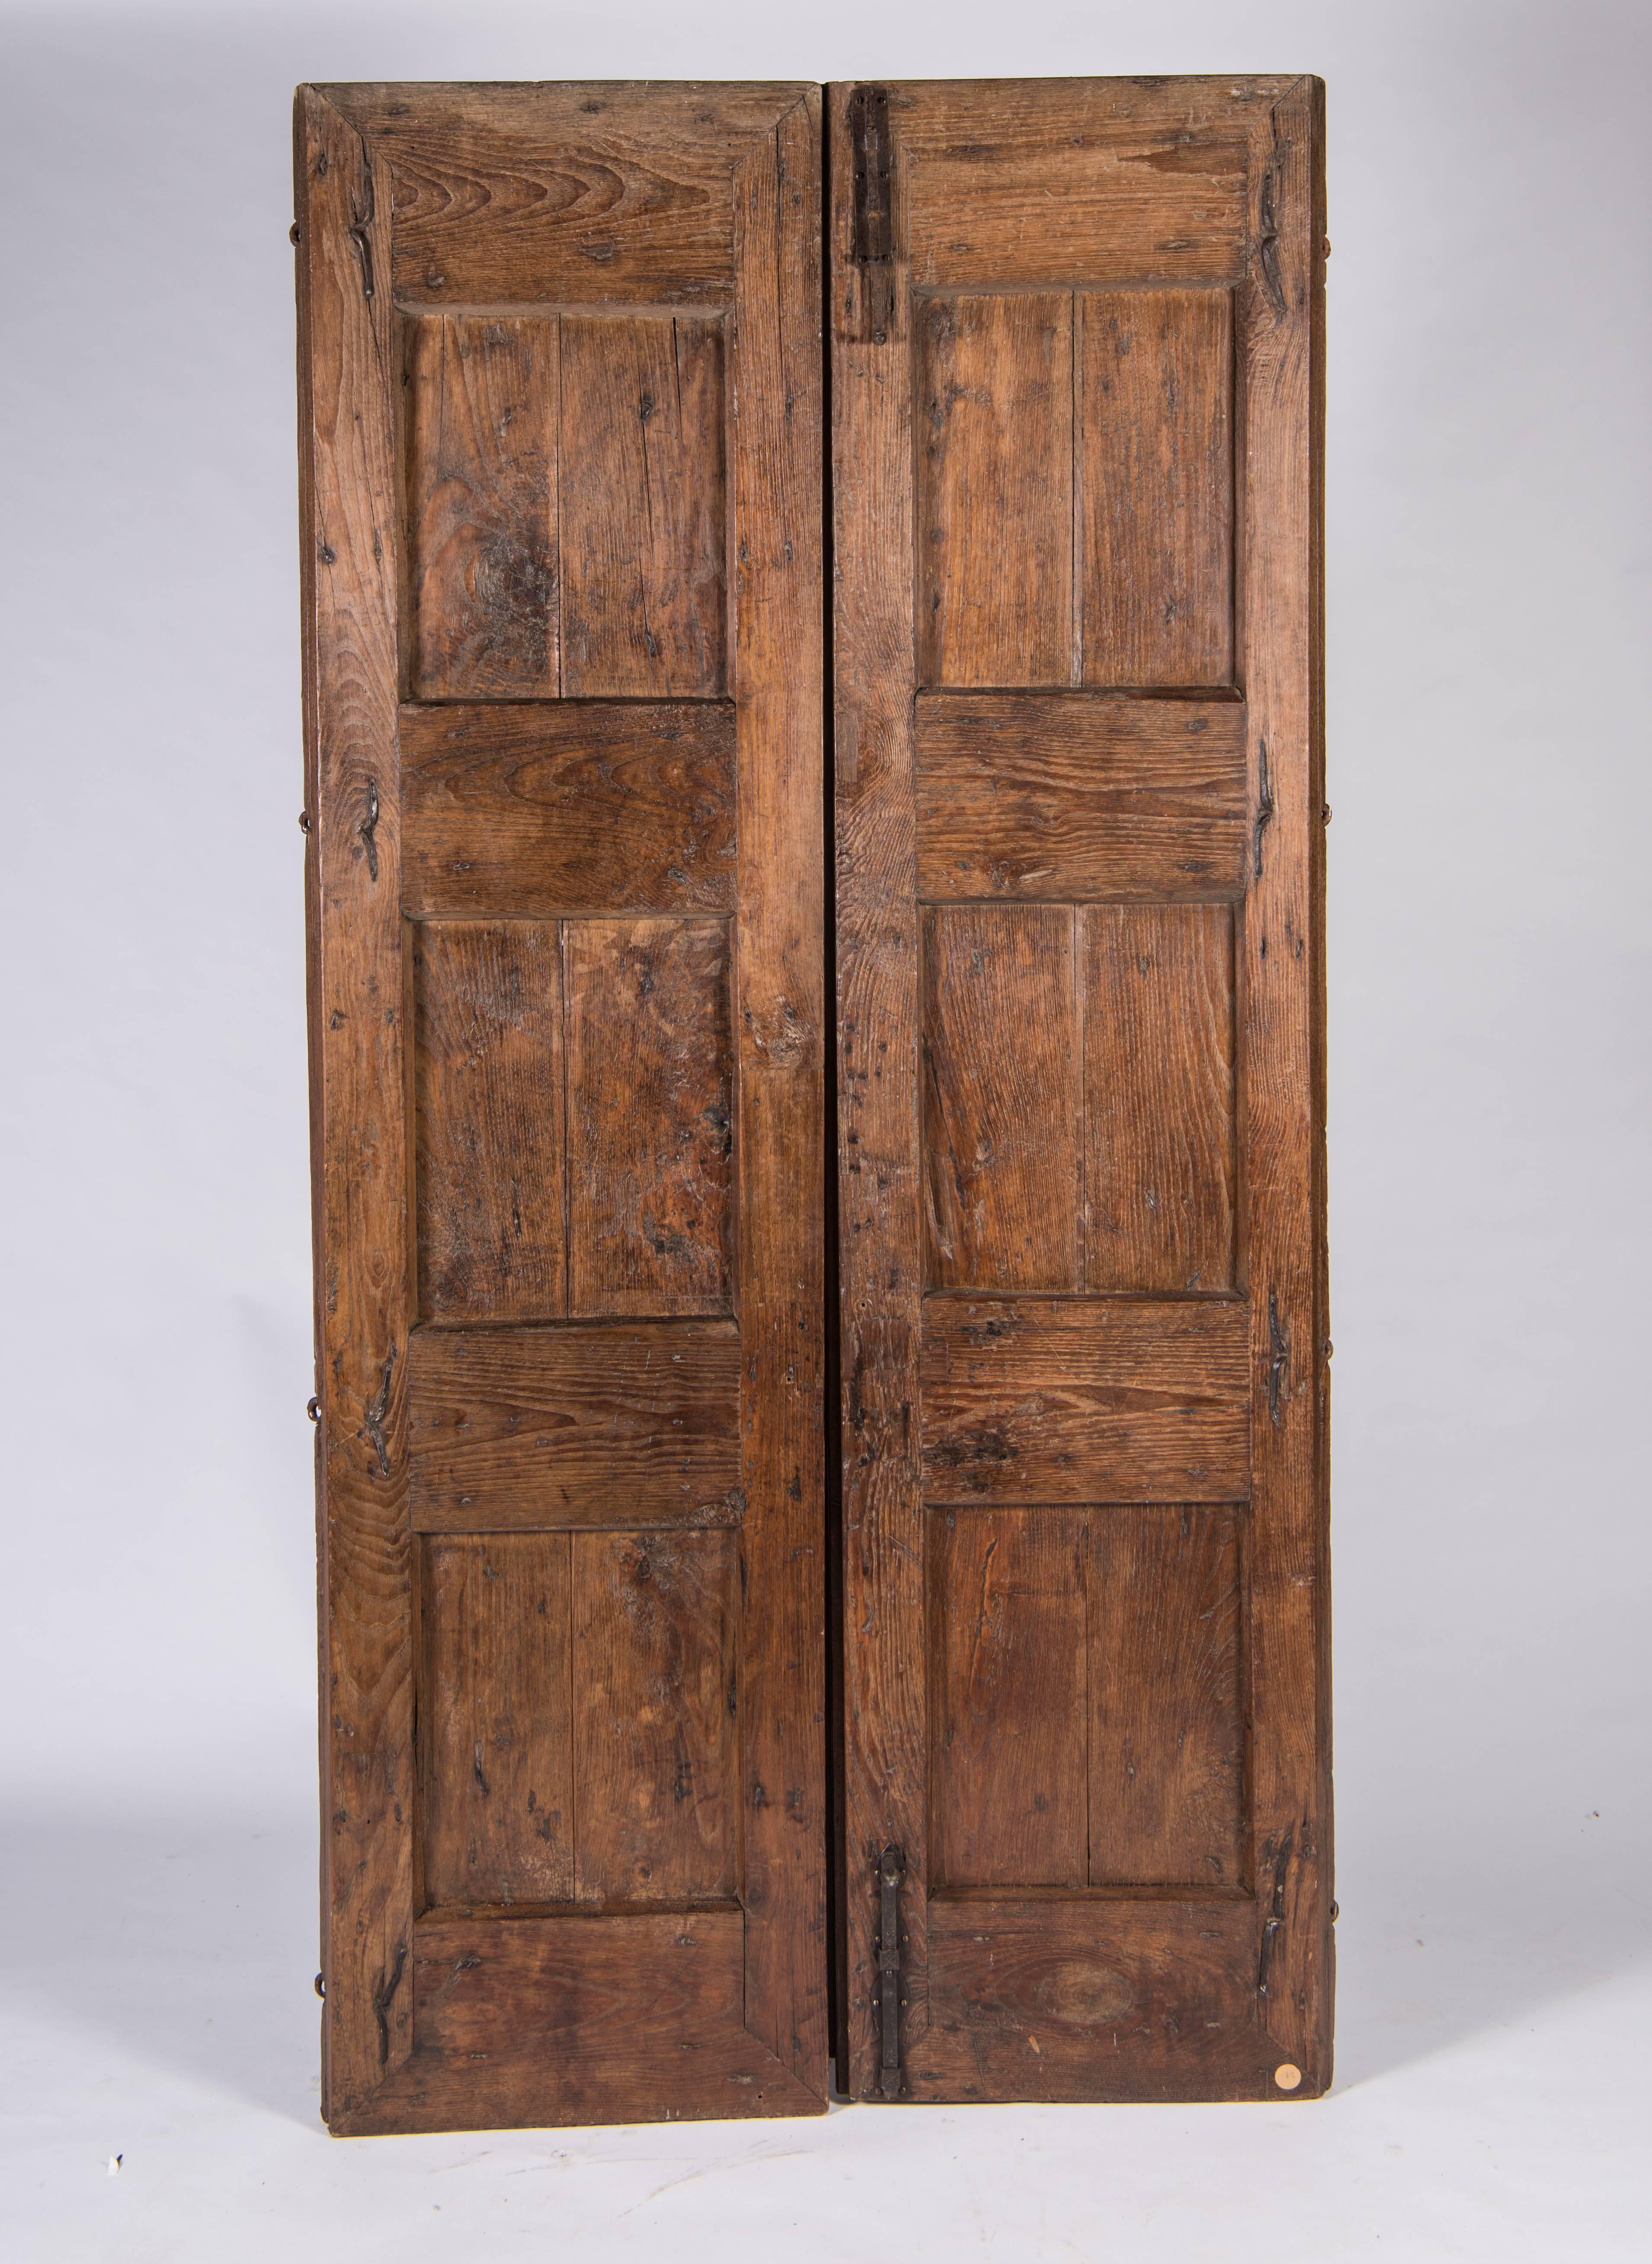 A truly exceptional pair of handcrafted doors. Solid and exceptionally heavy.
Two pair available. Sold separately.